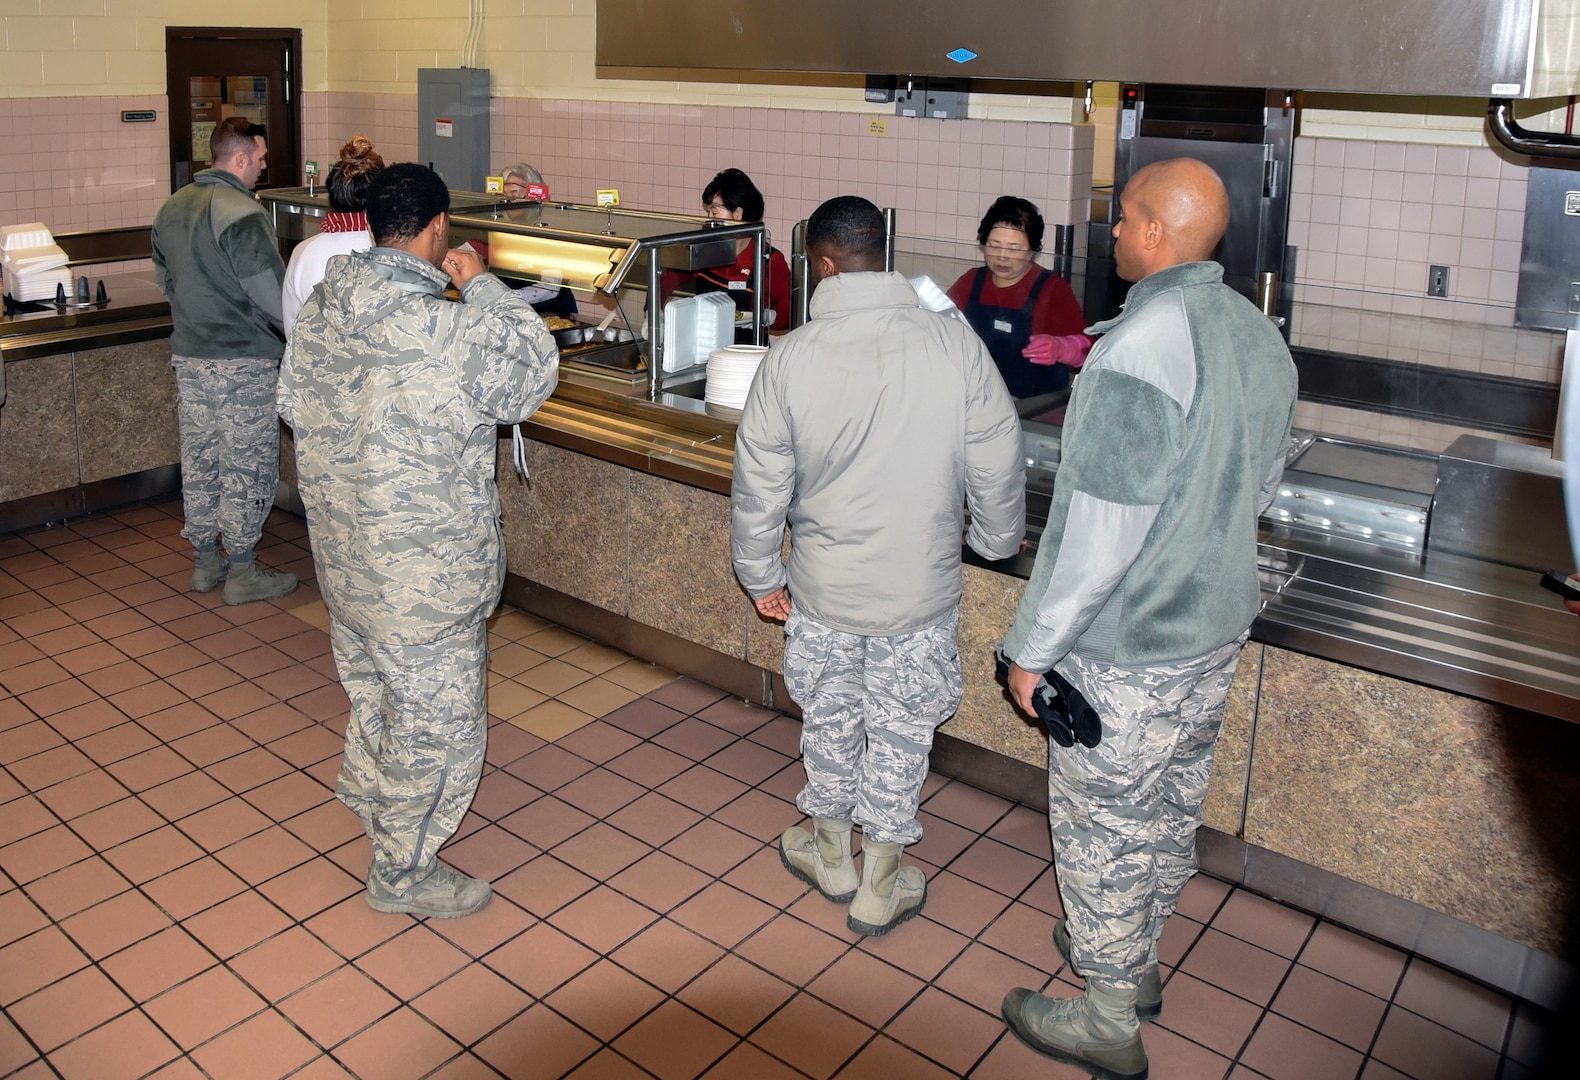 U.S. Air Force Airmen wait in line to get served during dinner, Jan. 24, 2018, at Kunsan Air Force Base, Republic of Korea. The dining facility staff are responsible of serving nearly 2,000 U.S. service members and any cash paying customer on a daily basis. (U.S. Air Force photo by Senior Airman Colby L. Hardin)